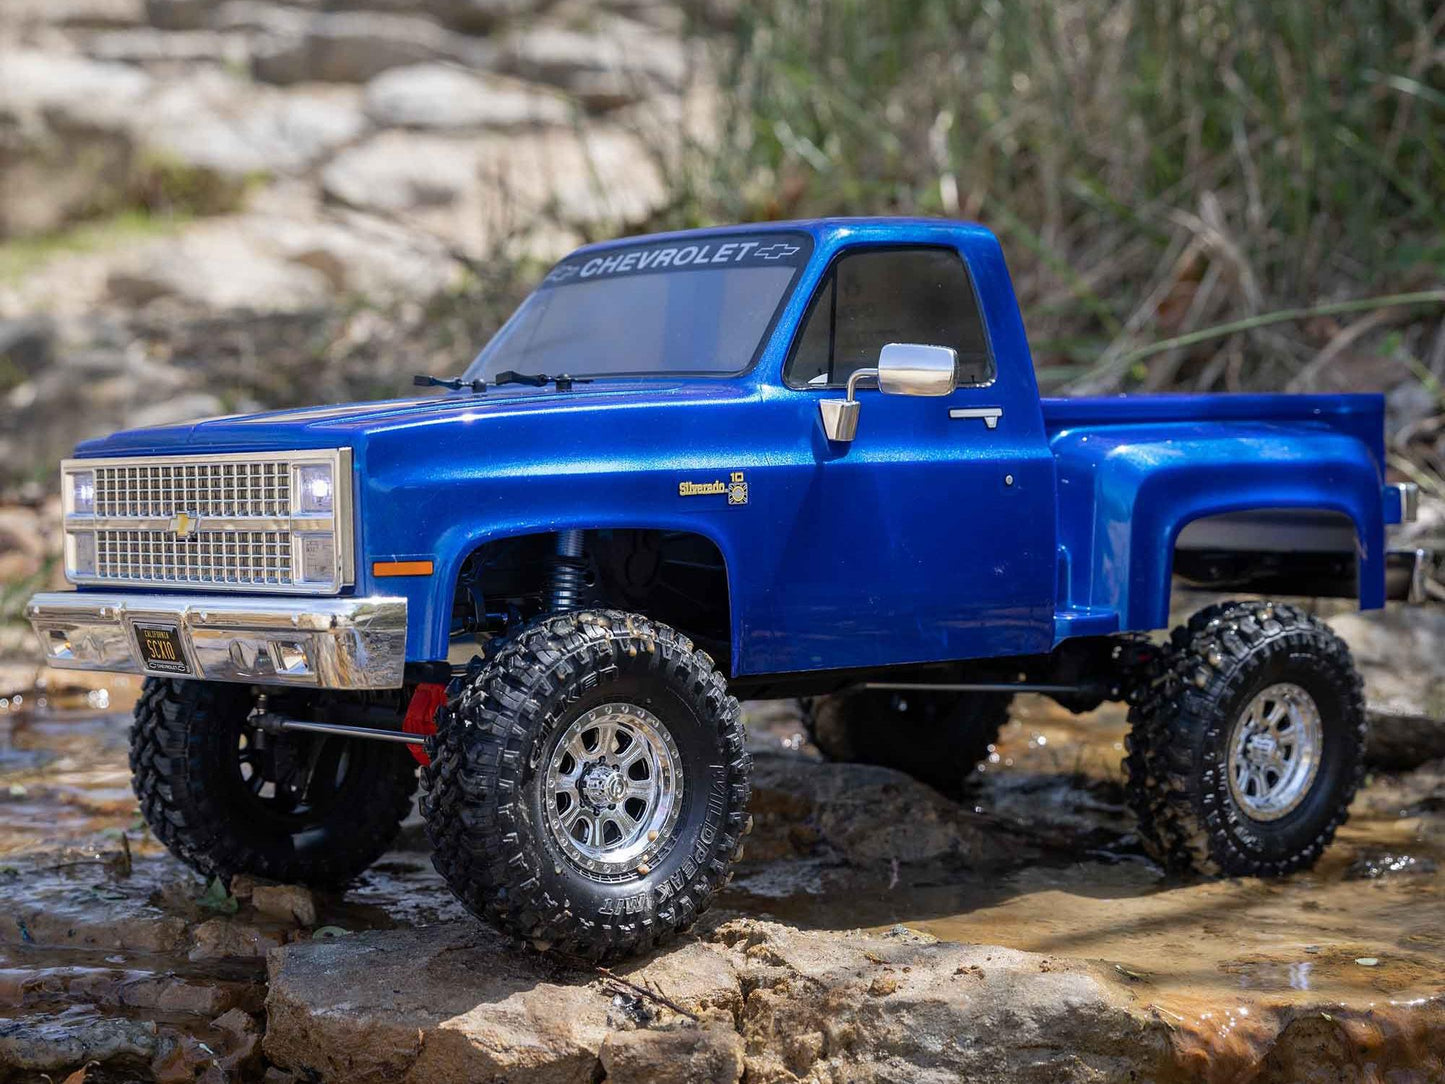 AXIAL 1/10 SCX10 III Base Camp 1982 Chevy K10 4X4 RTR, Blue  AXI03030T1 /  BLACK AXI03030T2 shadow stock